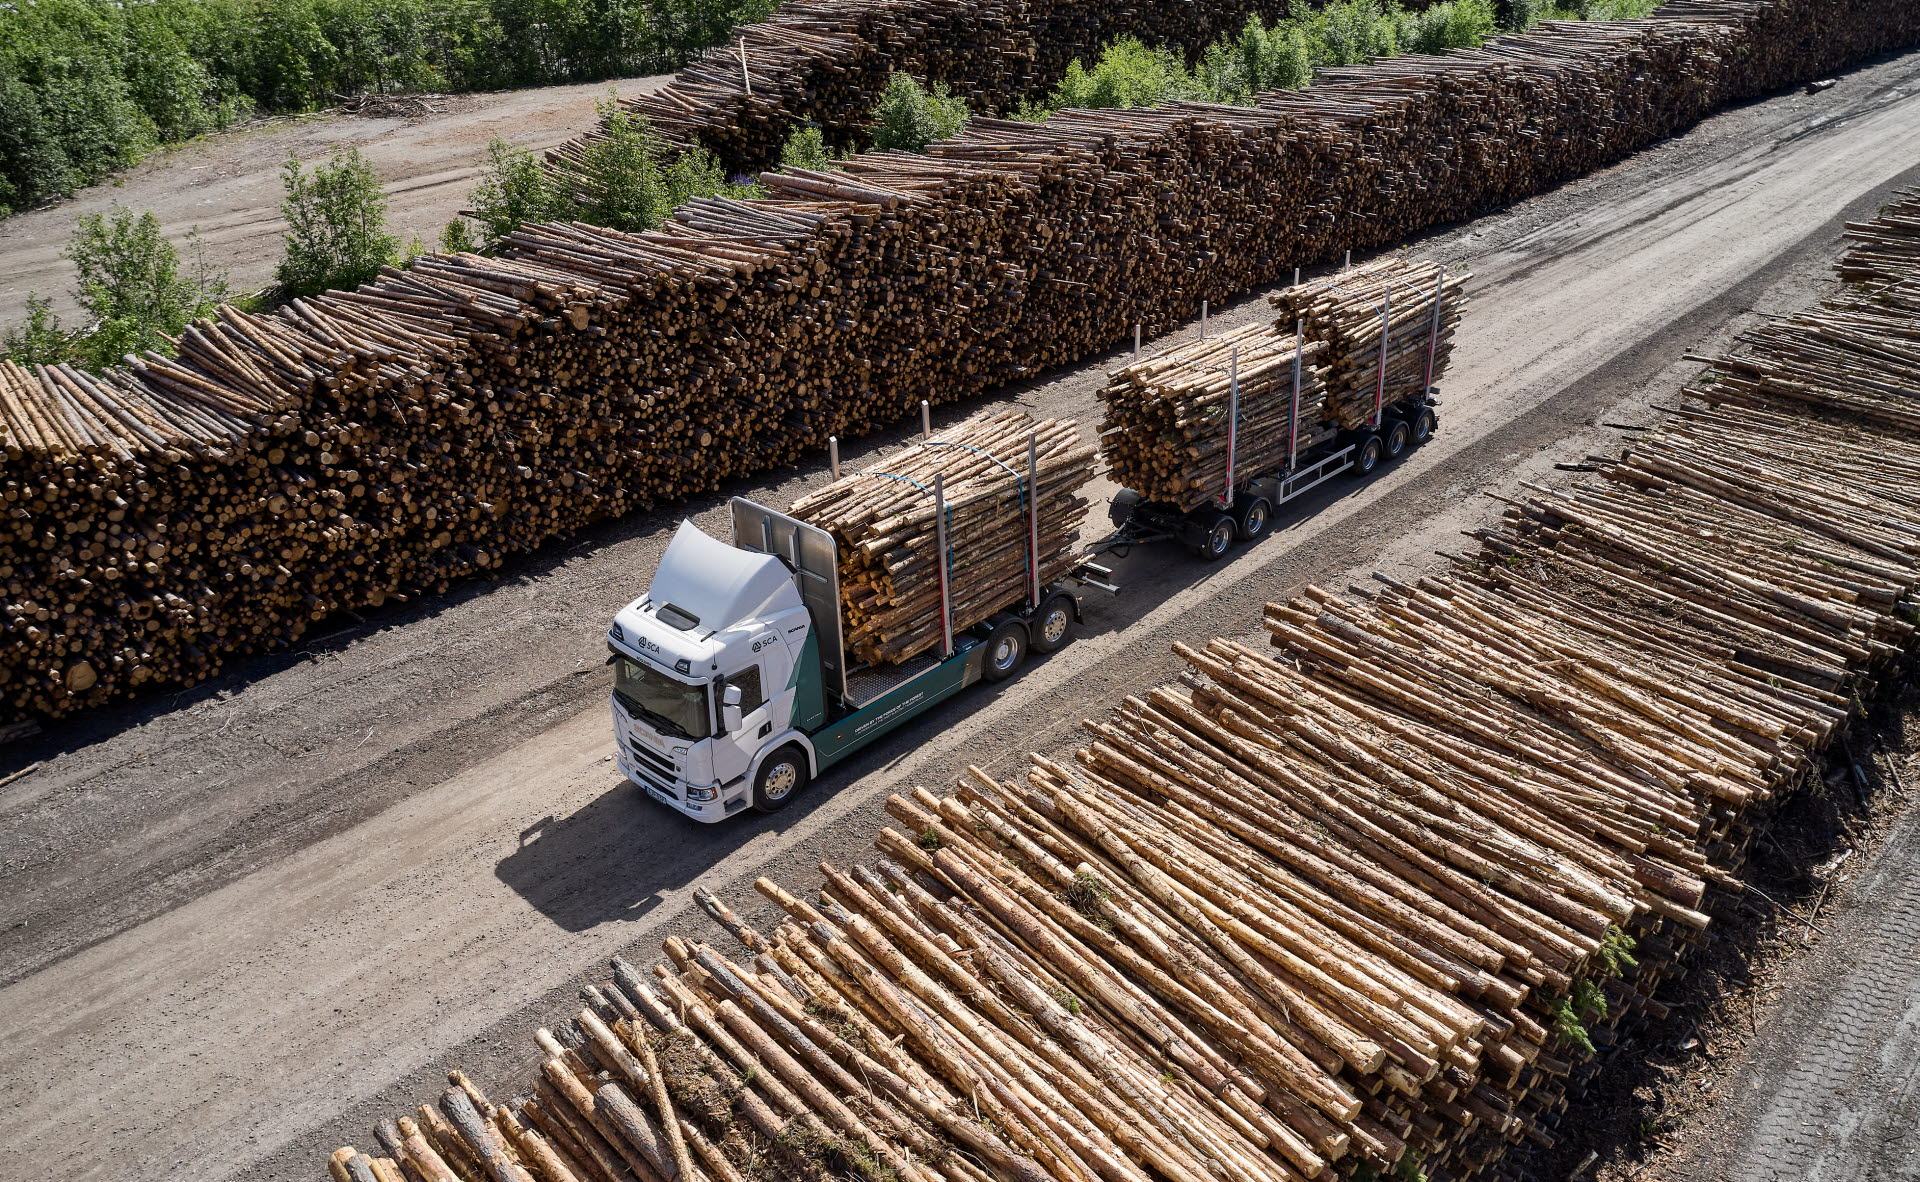 SCA's world-unique electric timber truck from Scania has arrived